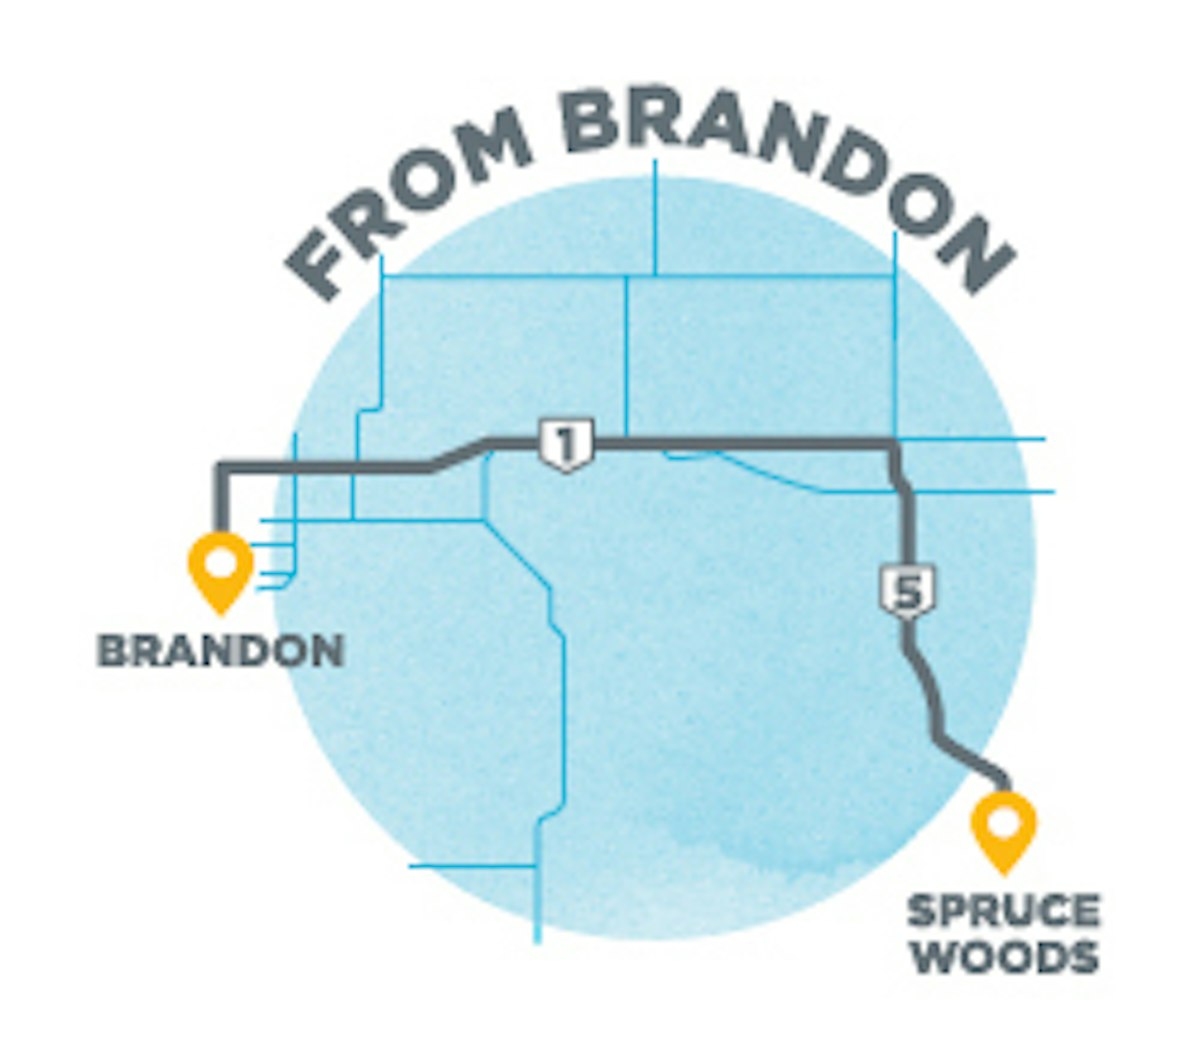 From brandon to spruce woods.